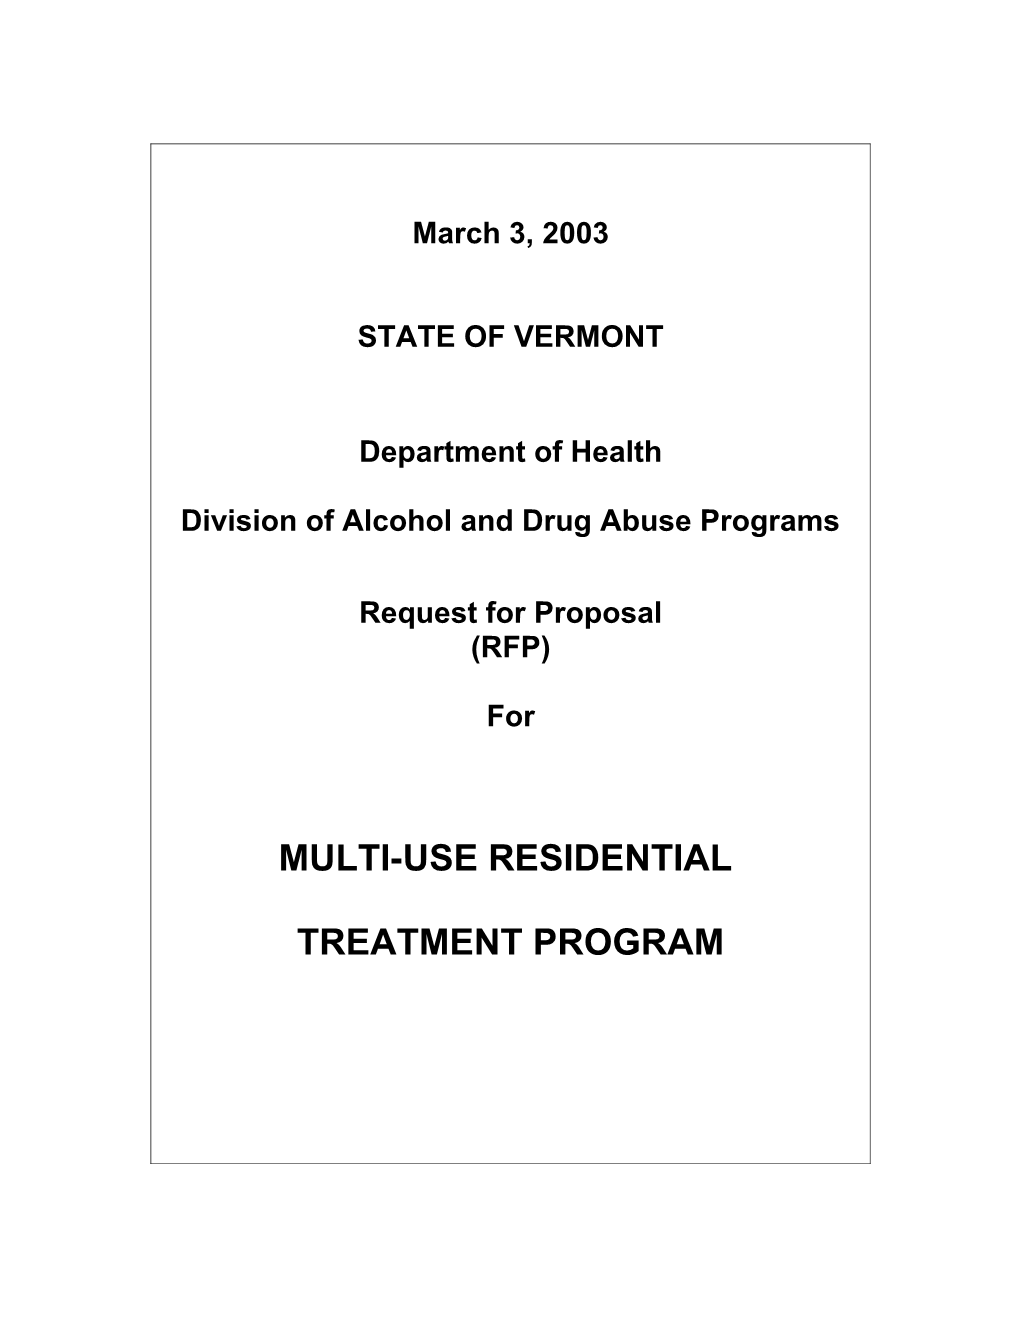 Division of Alcohol and Drug Abuse Programs